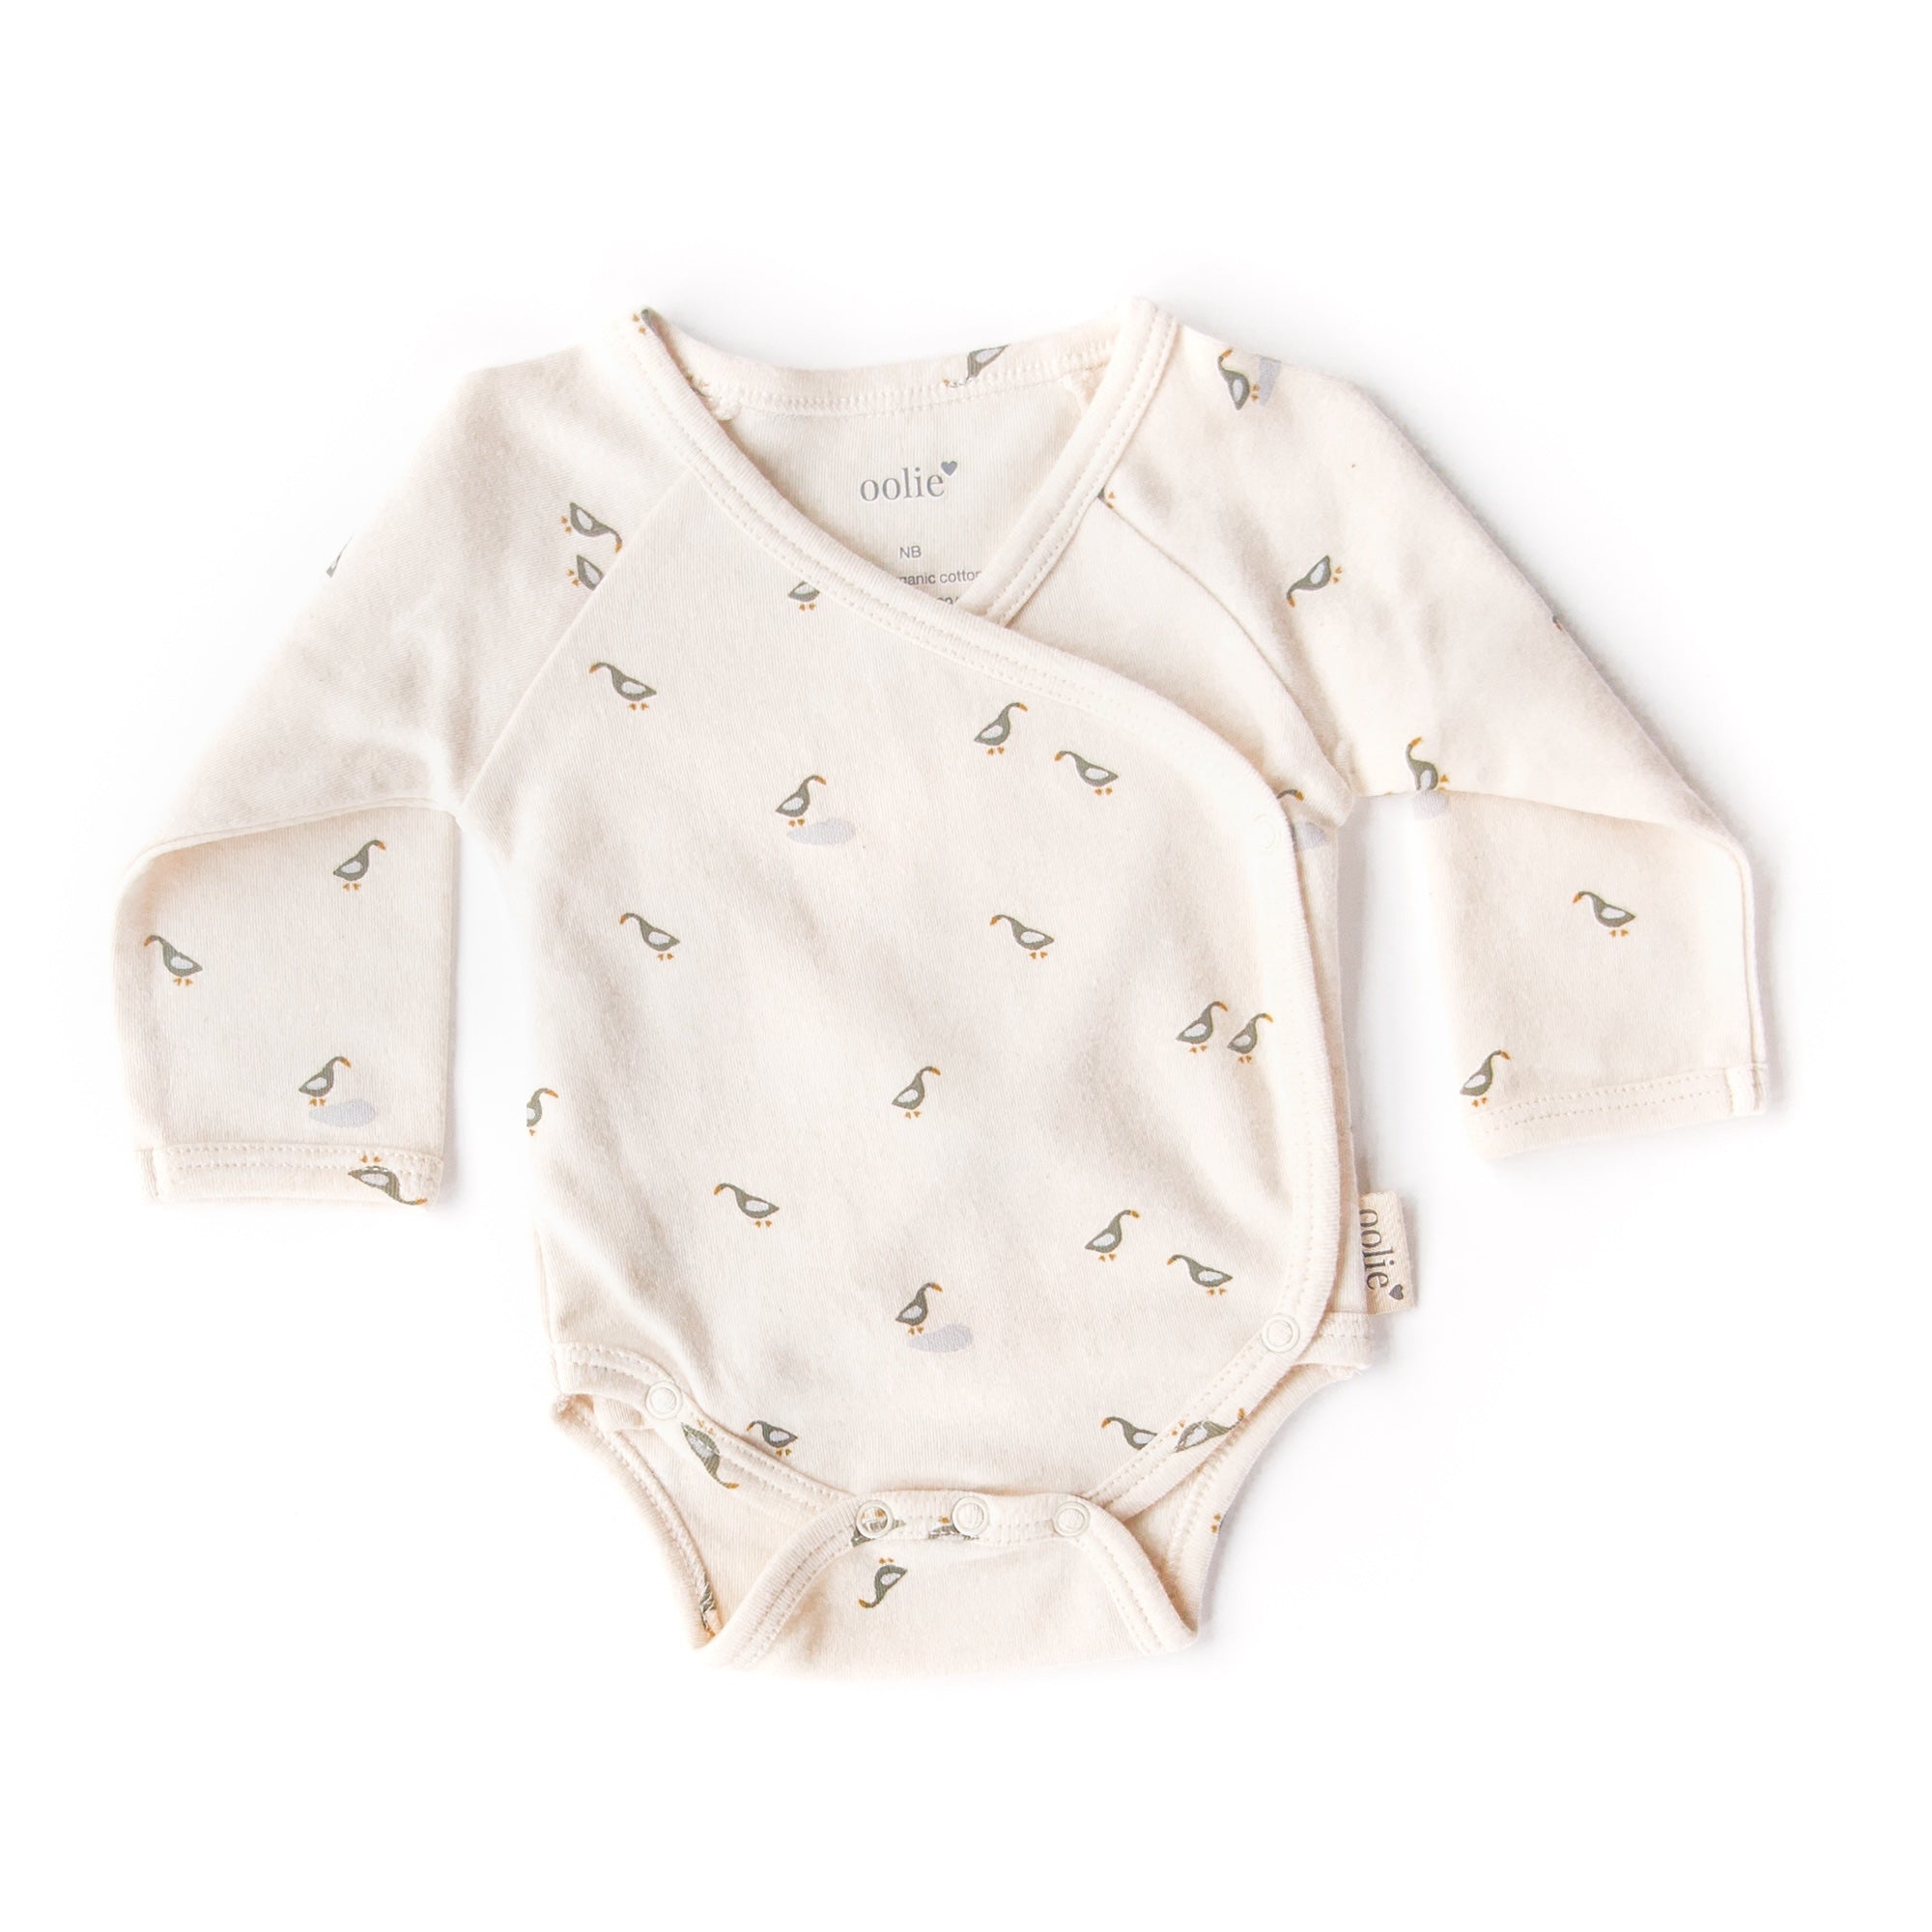 An Oolie organic cotton onesie with the runner ducks print, a natural color with small green and blue ducks in a repeating pattern.